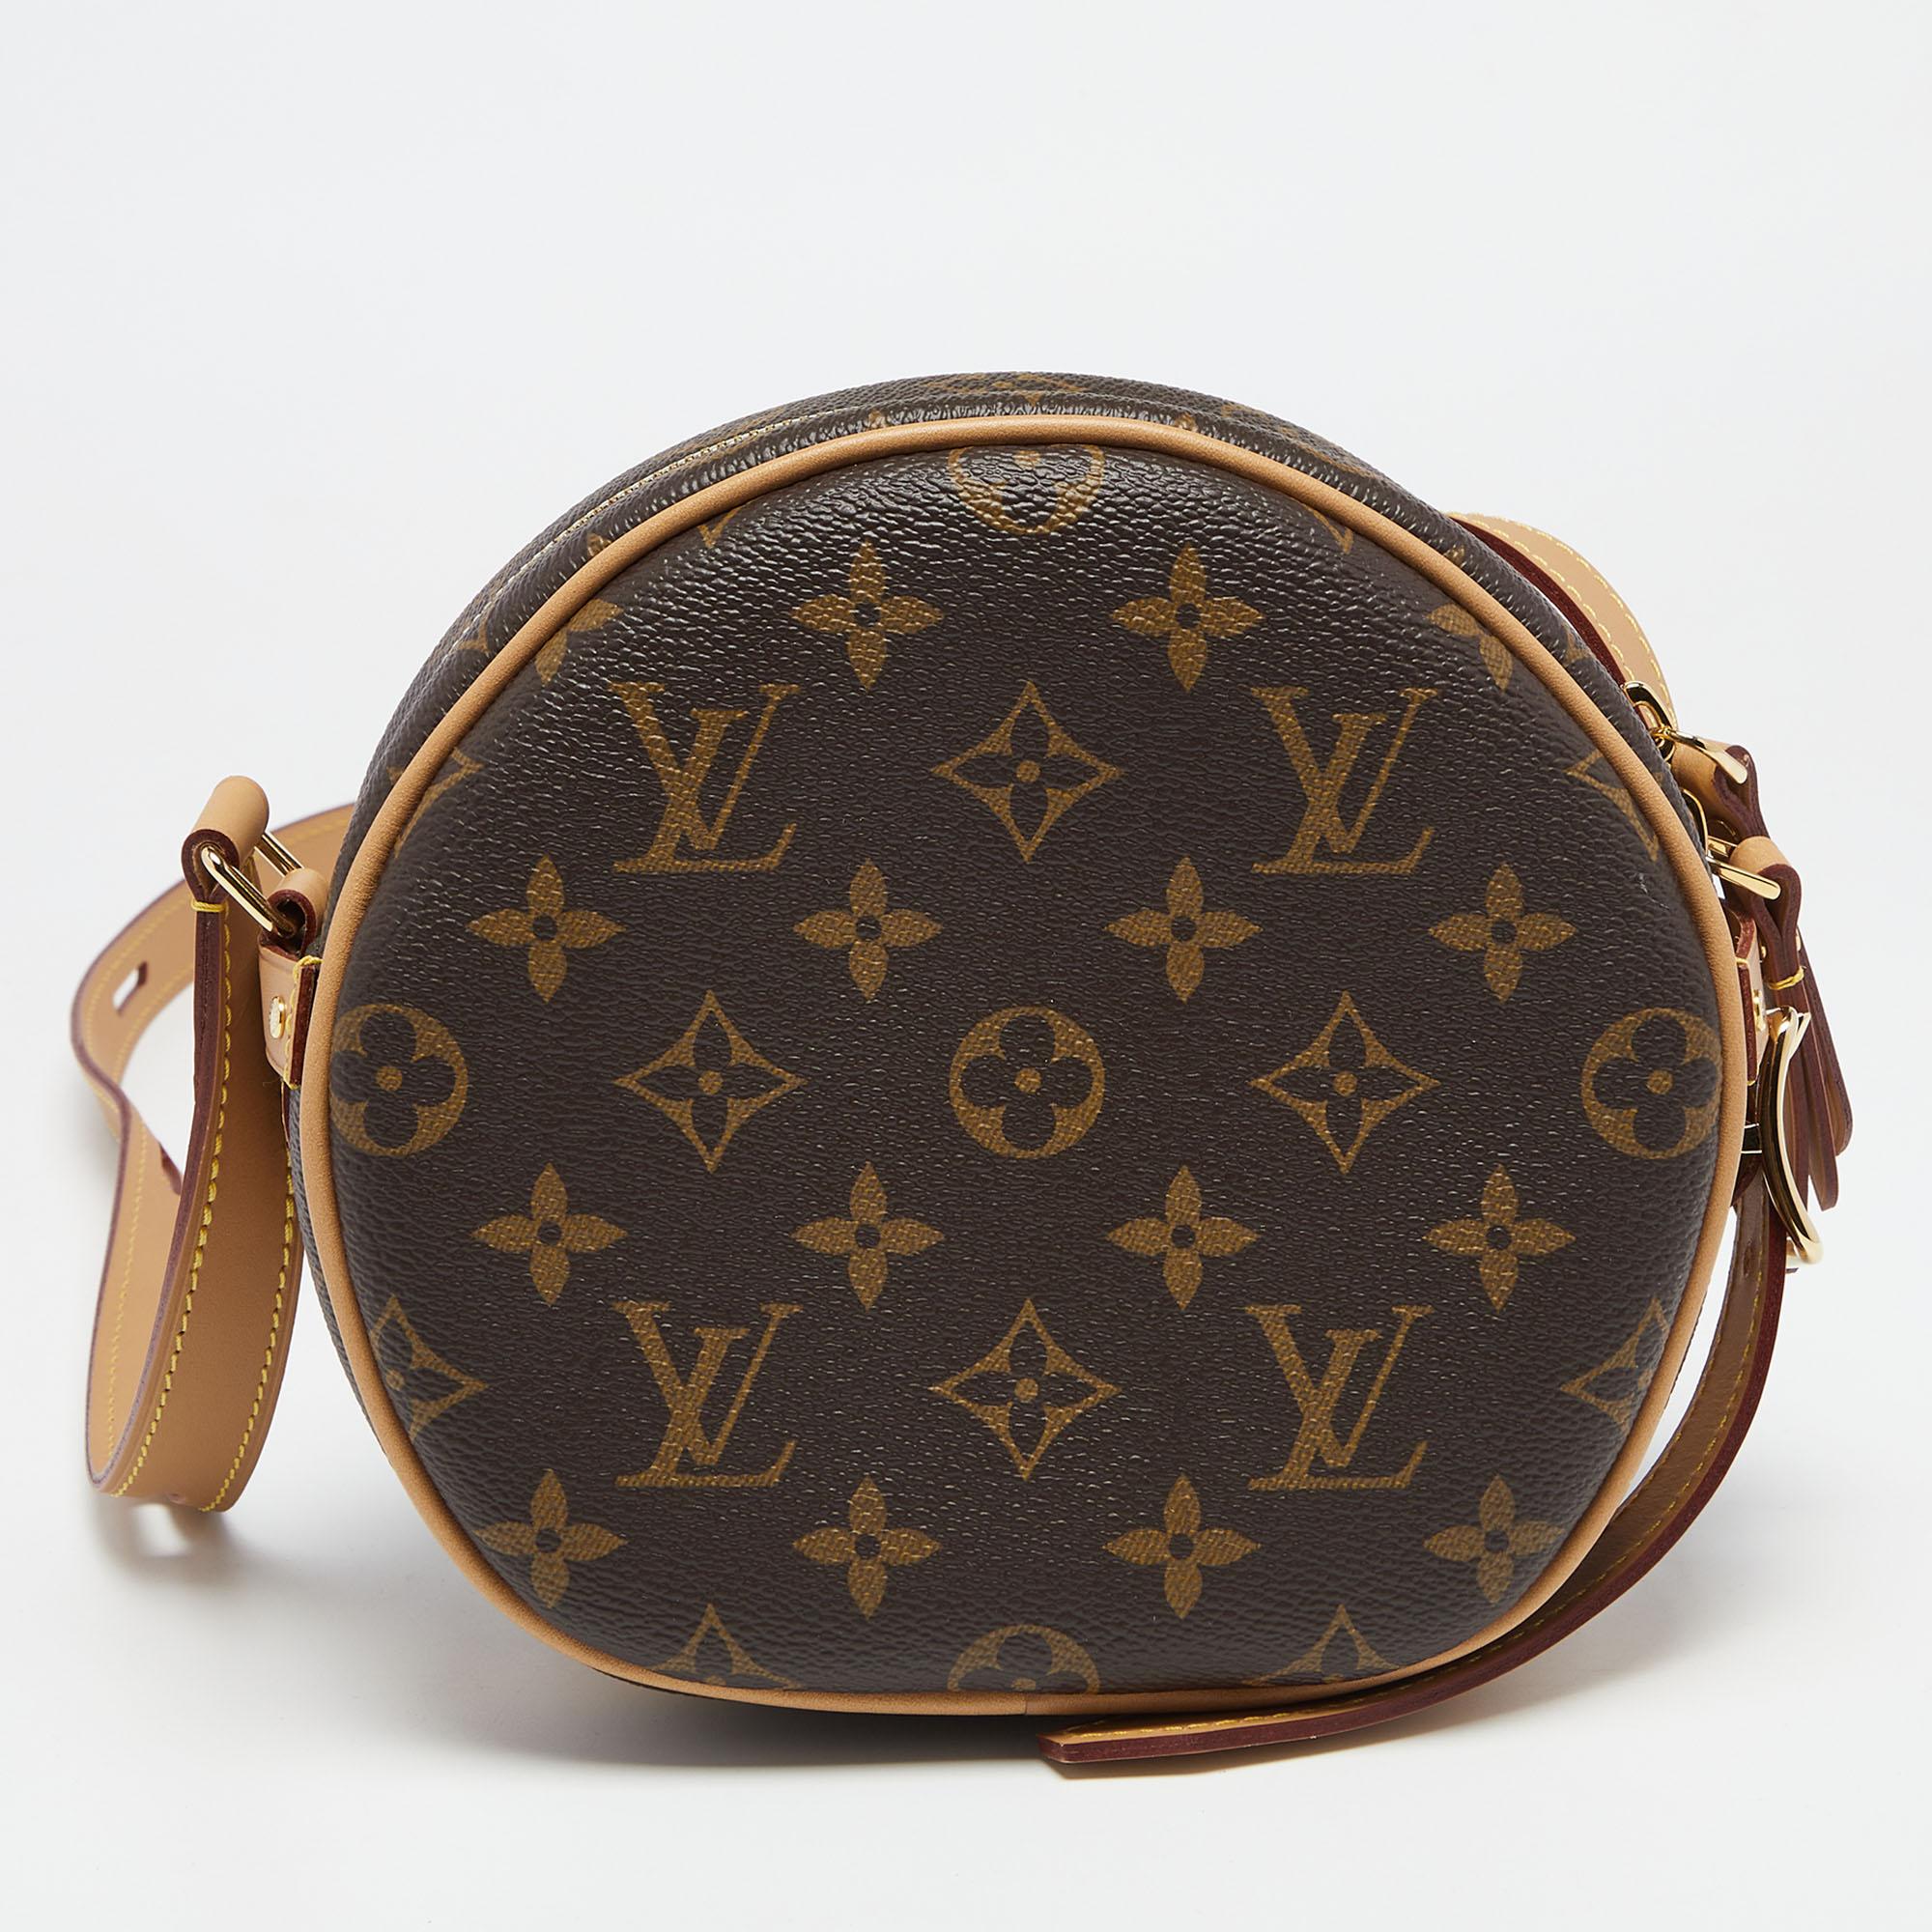 Merged beautifully with signature design, this Boite Chapeau Souple PM bag from Louis Vuitton remains globally popular. This irresistible and elegant bag not just highlights your impeccable styling choices but also meets your practical demands. It